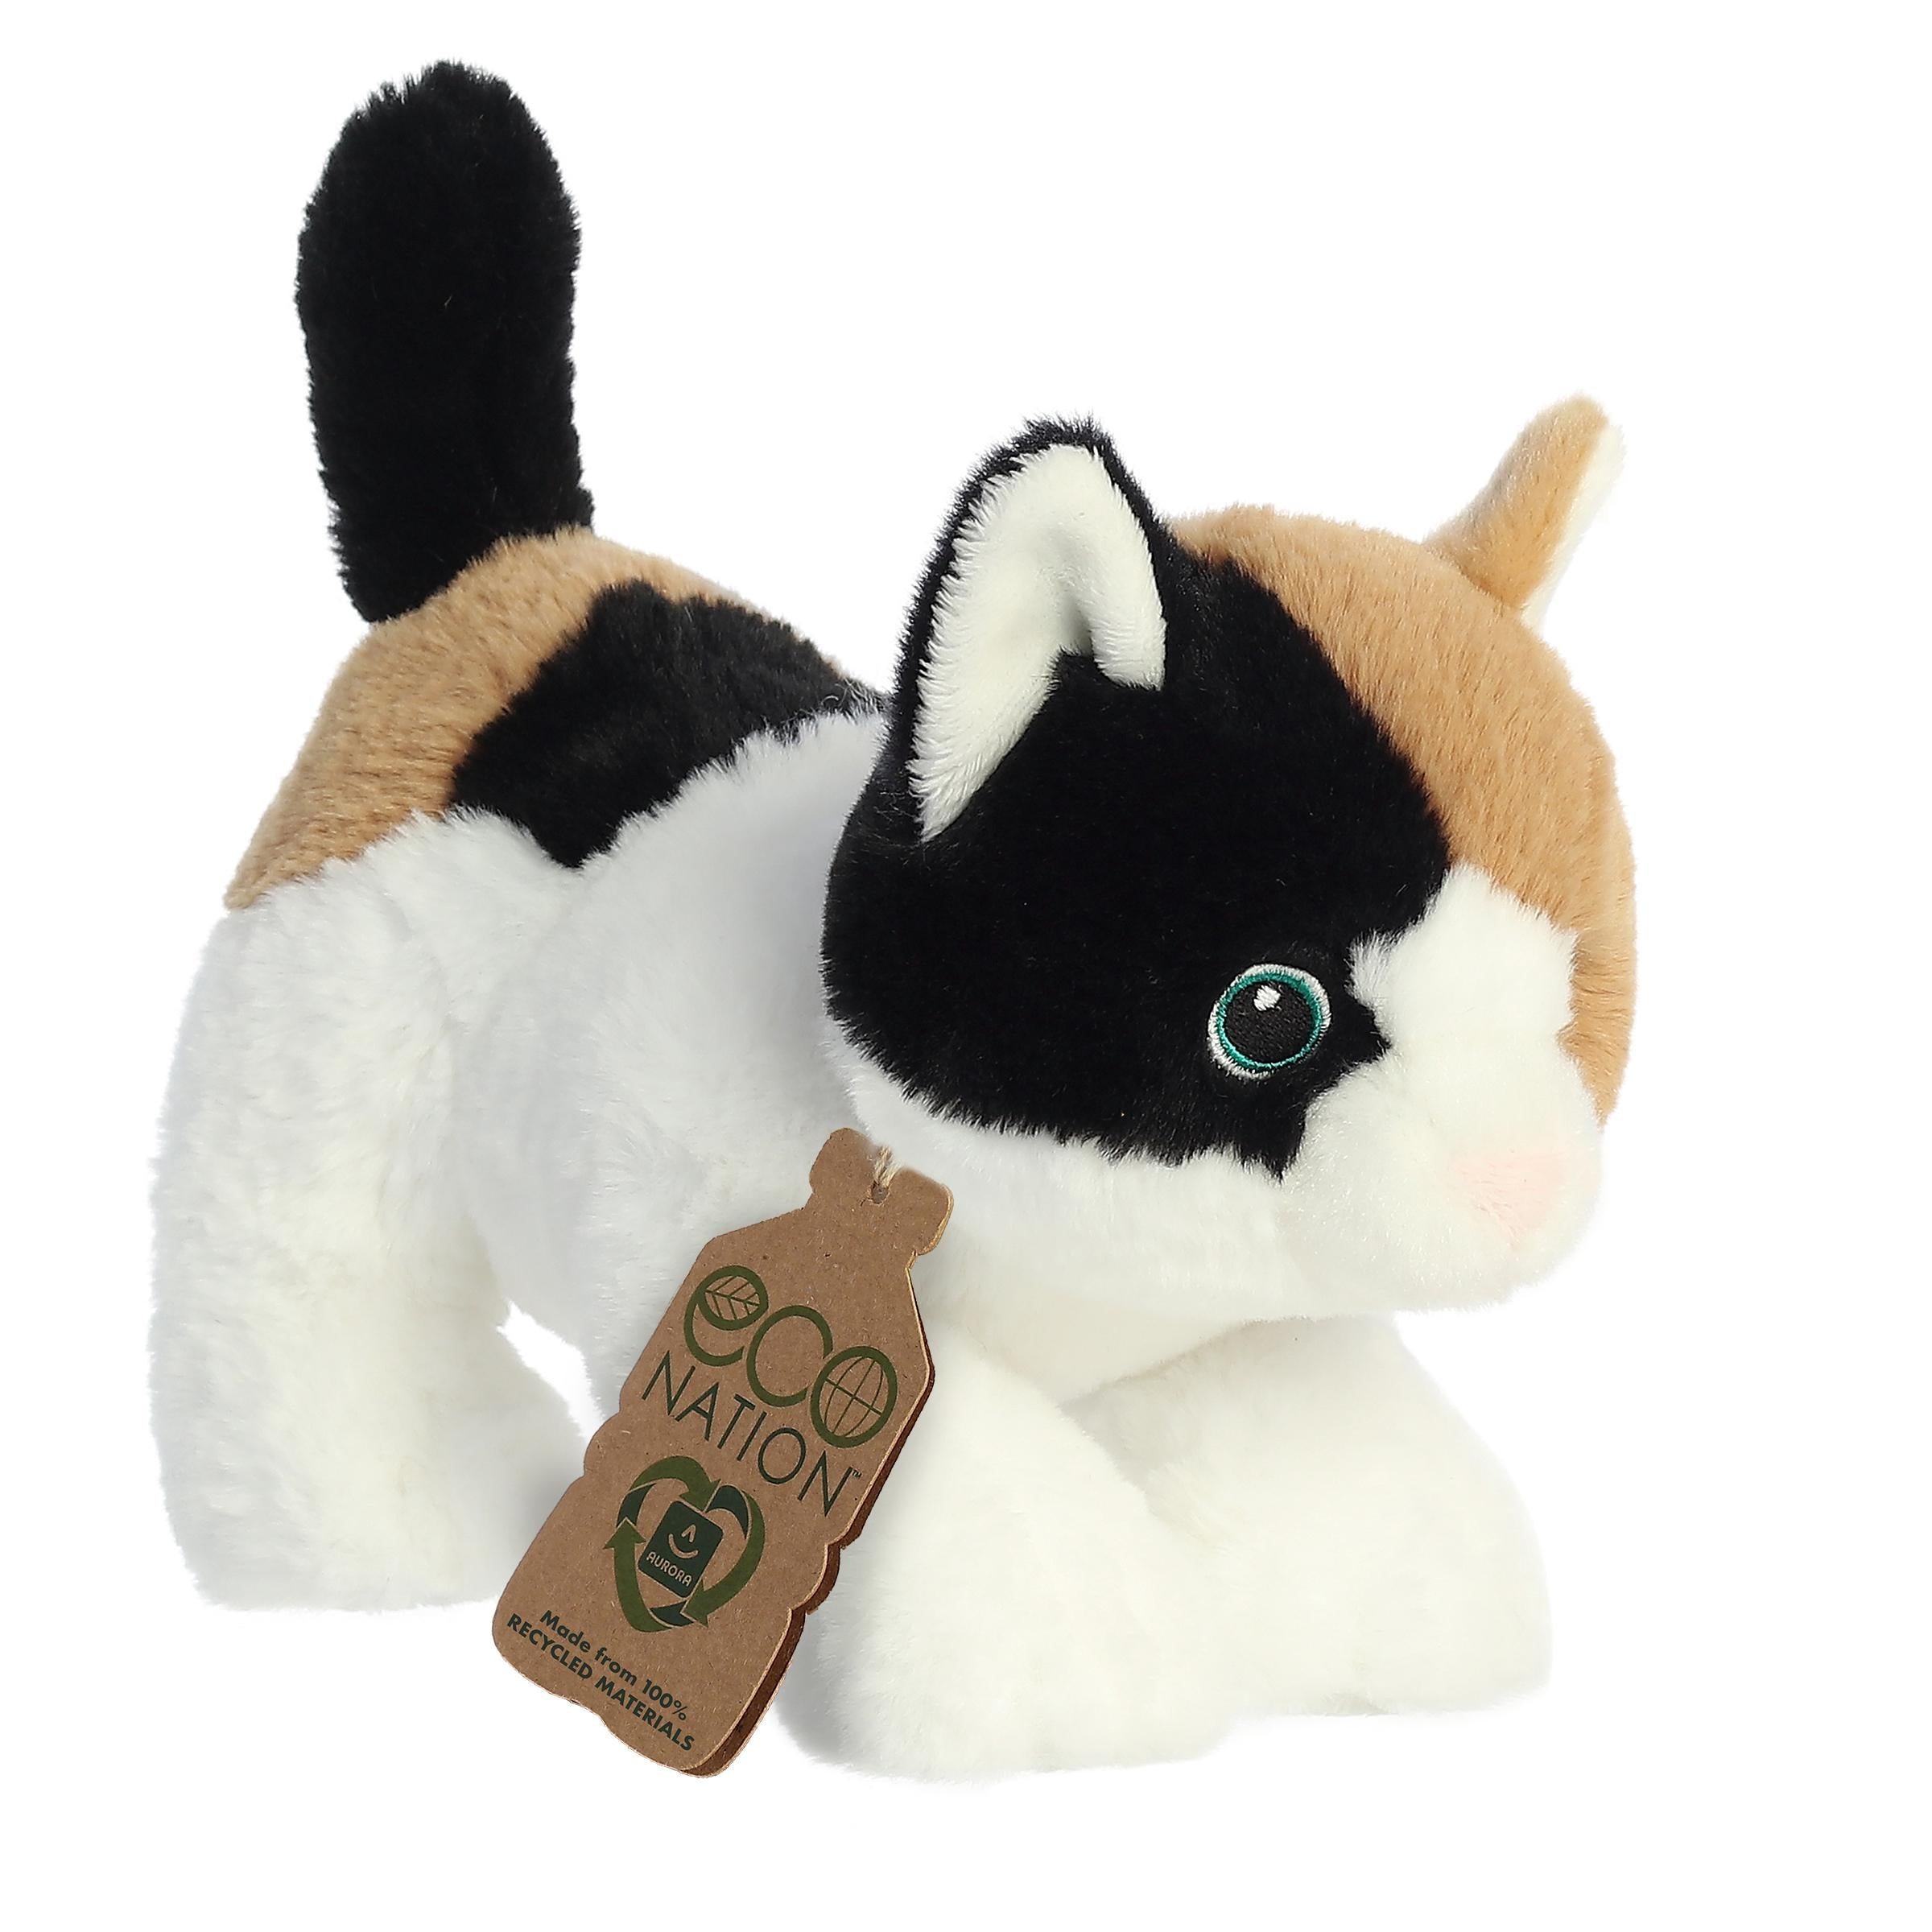 A lovely calico cat plush with a white, brown, and black coat, delicate embroidered eyes, and an eco-nation tag